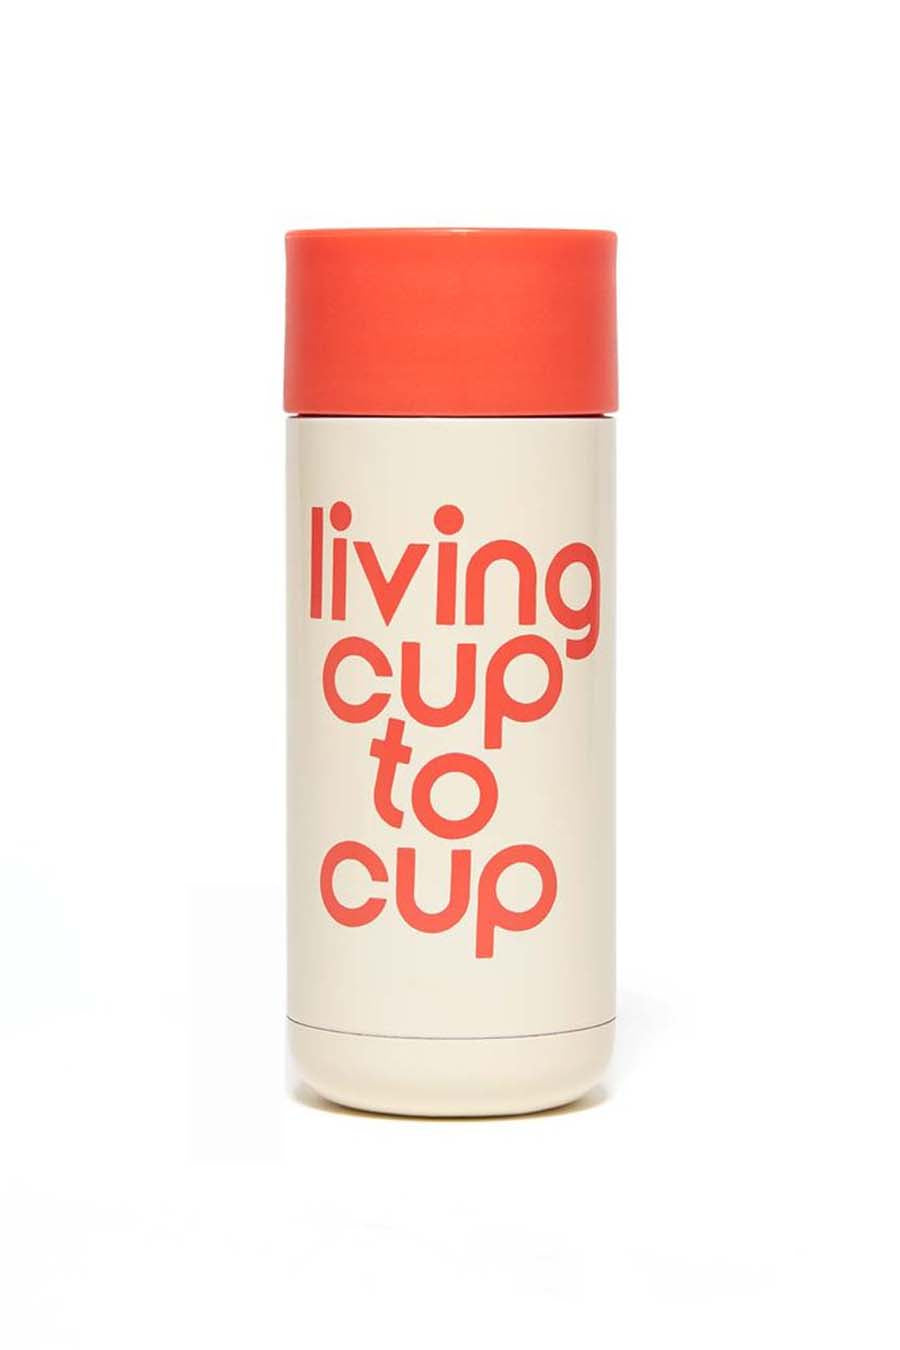 Stainless Steel Thermal Mug | Living Cup to Cup